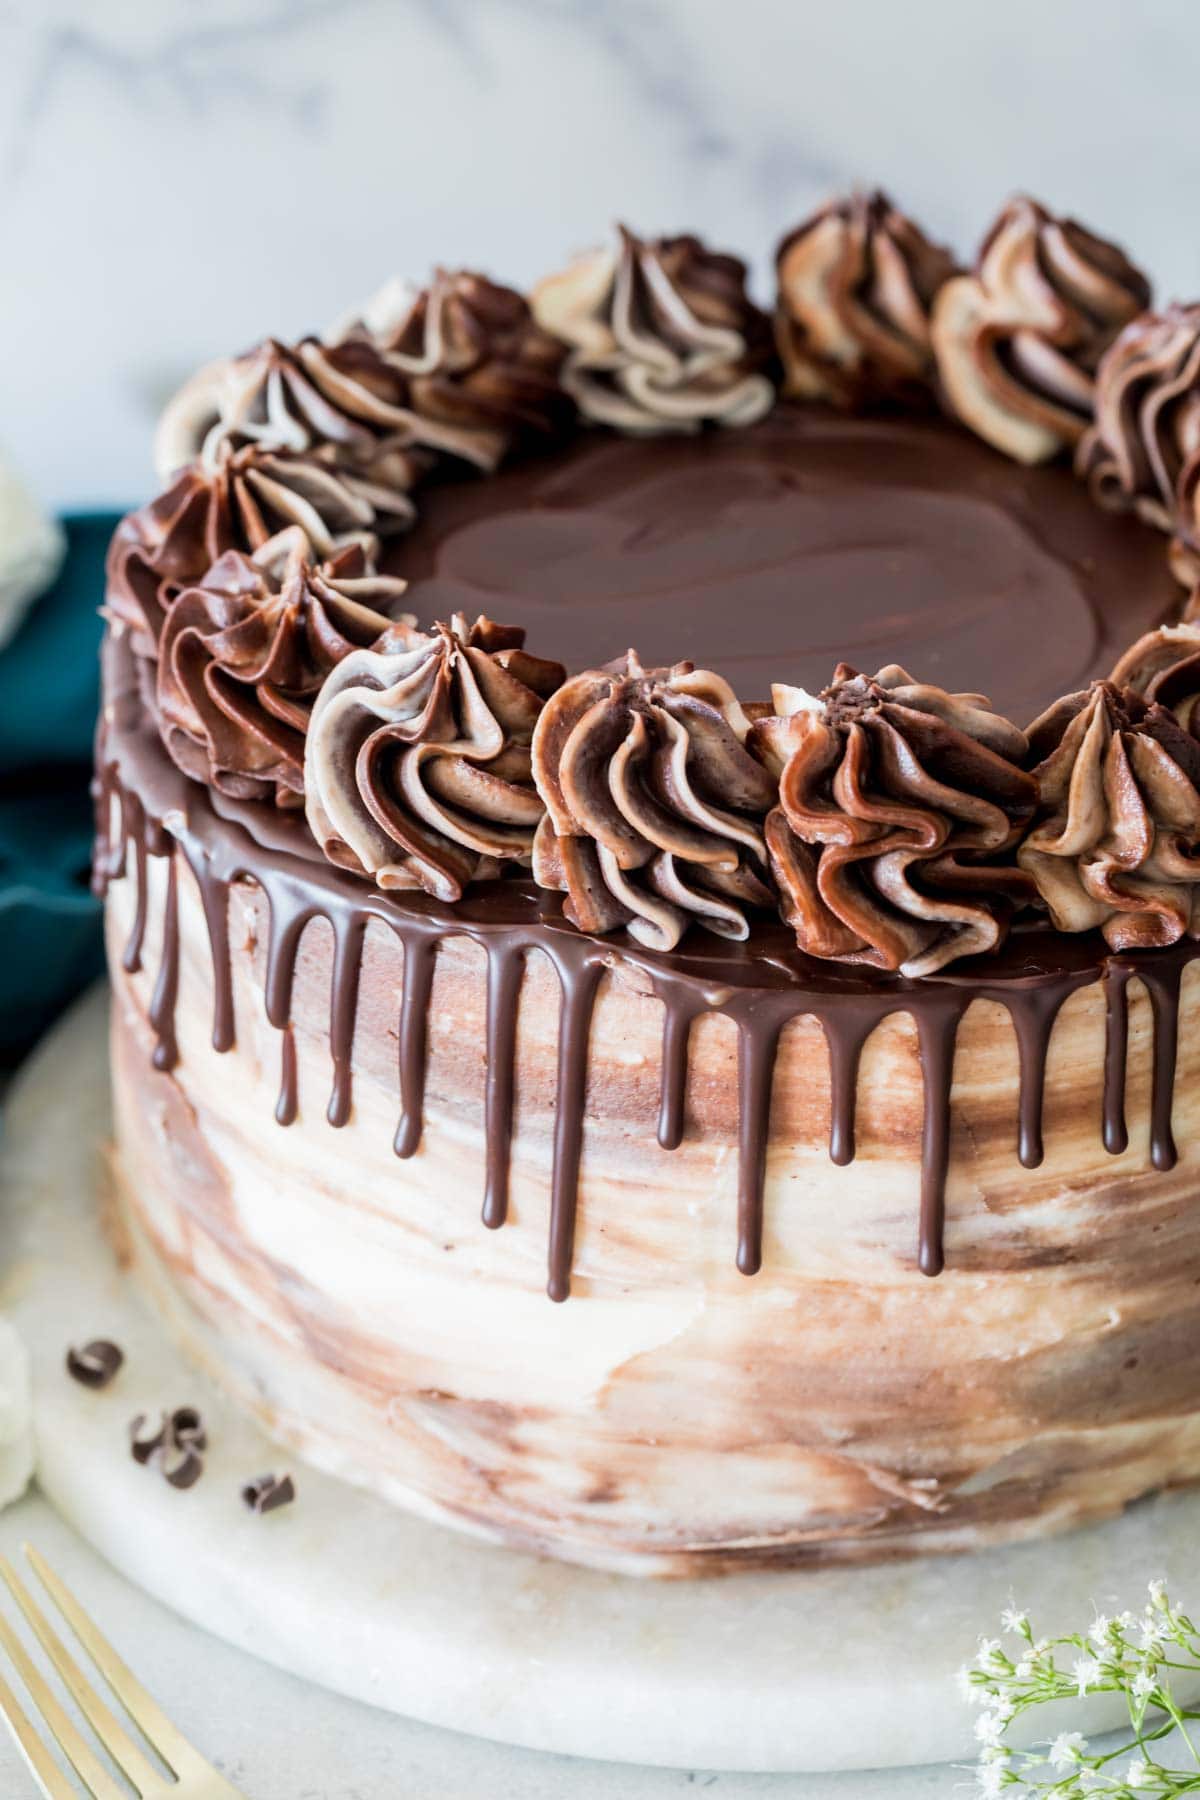 swirled chocolate cream cheese icing covering a cheesecake stuffed cake topped with a chocolate ganache drop and swirled icing dollops